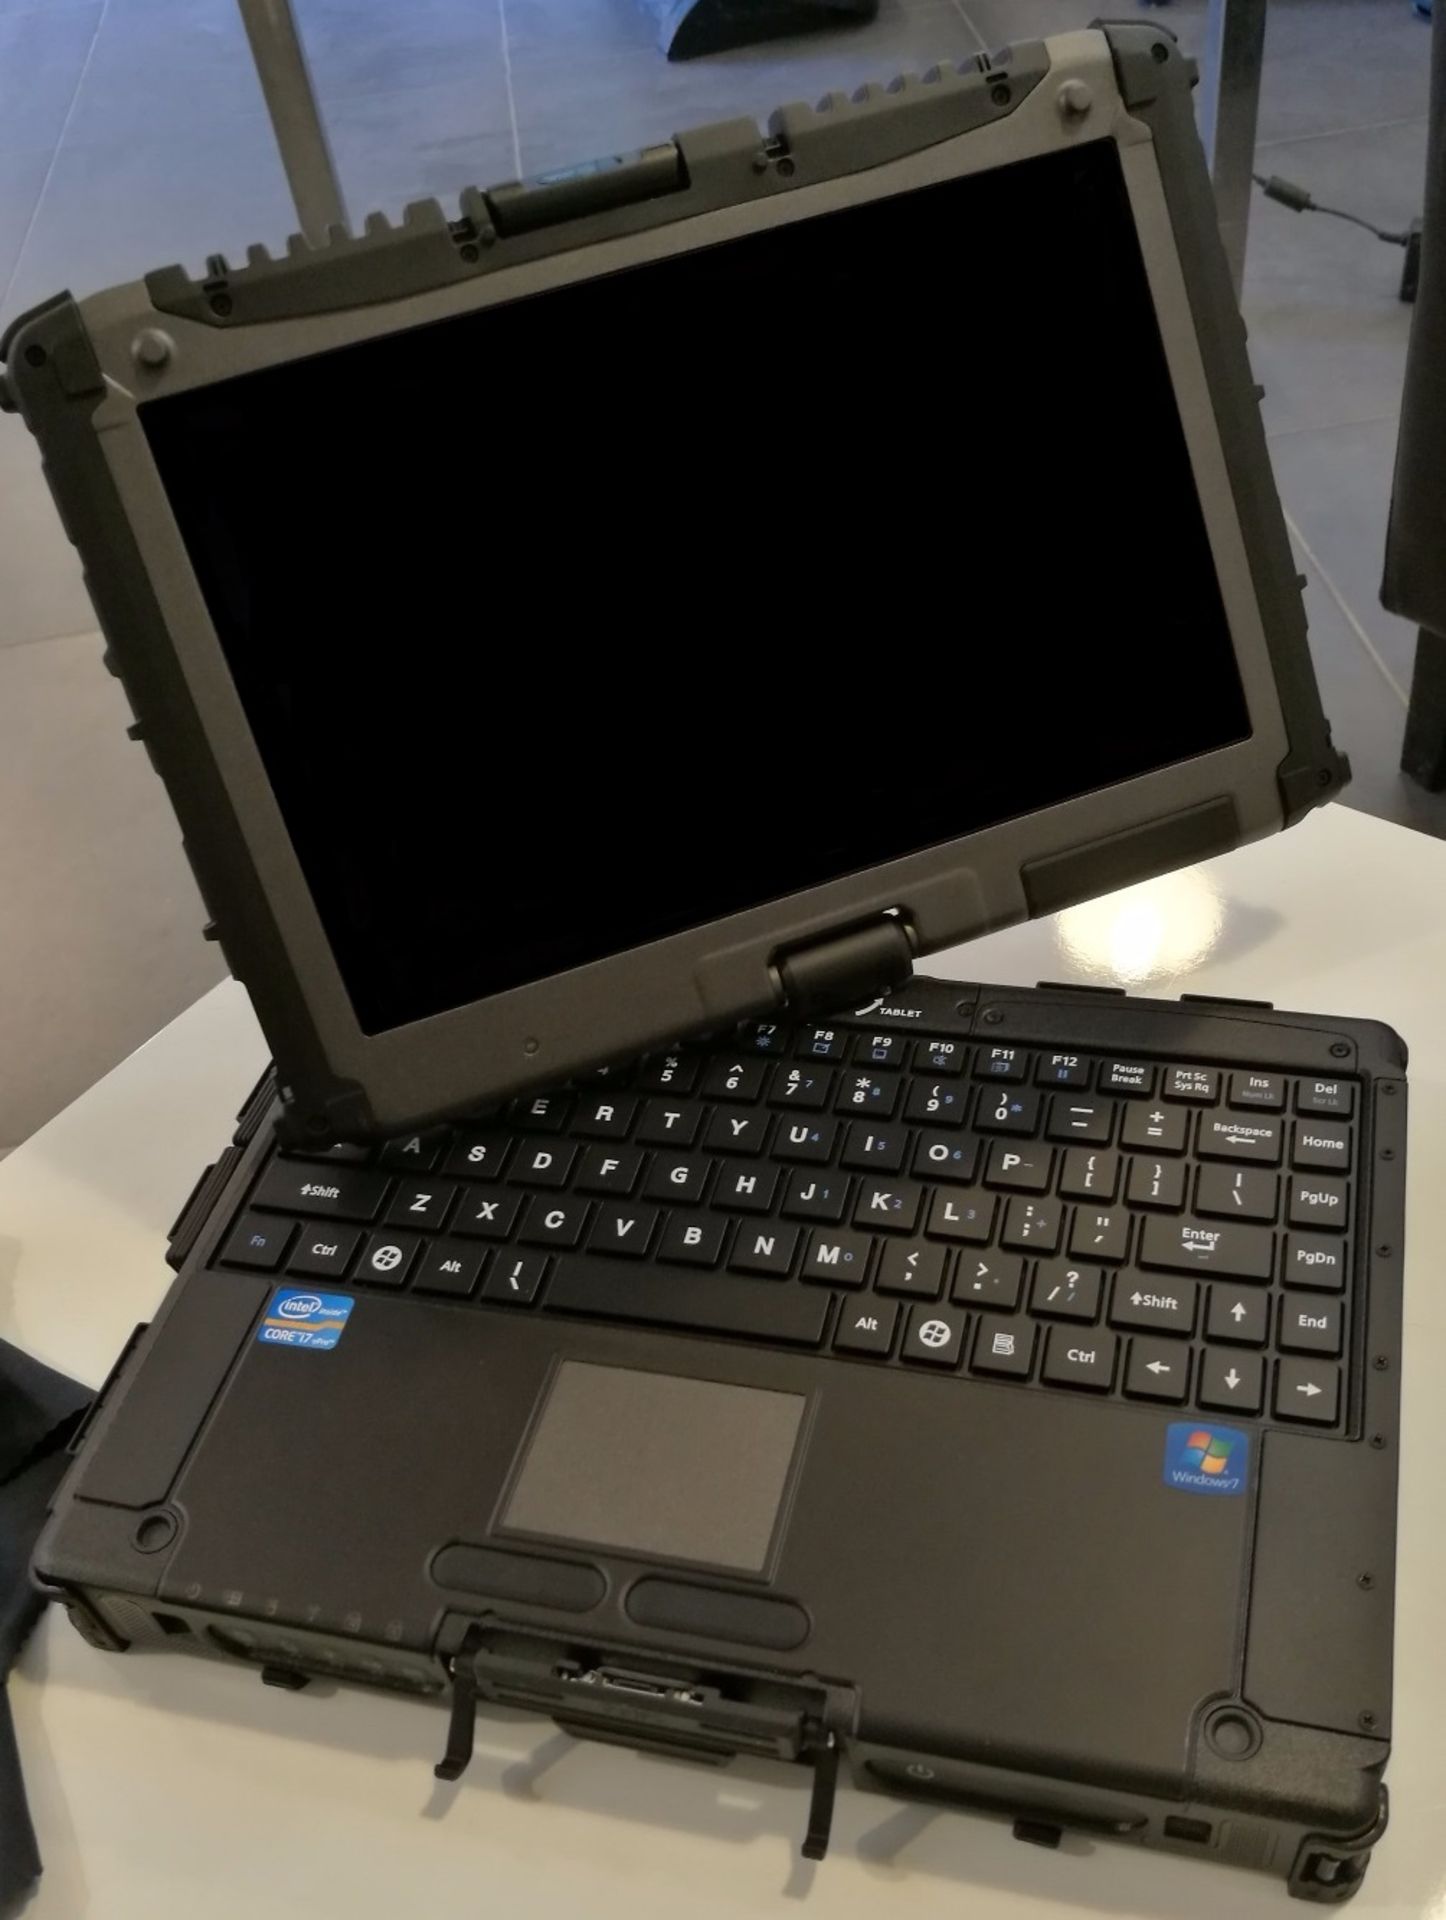 1 x Getac V200 Rugged Laptop Computer - Rugged Laptop That Transforms into a Tablet PC - Features an - Image 7 of 10